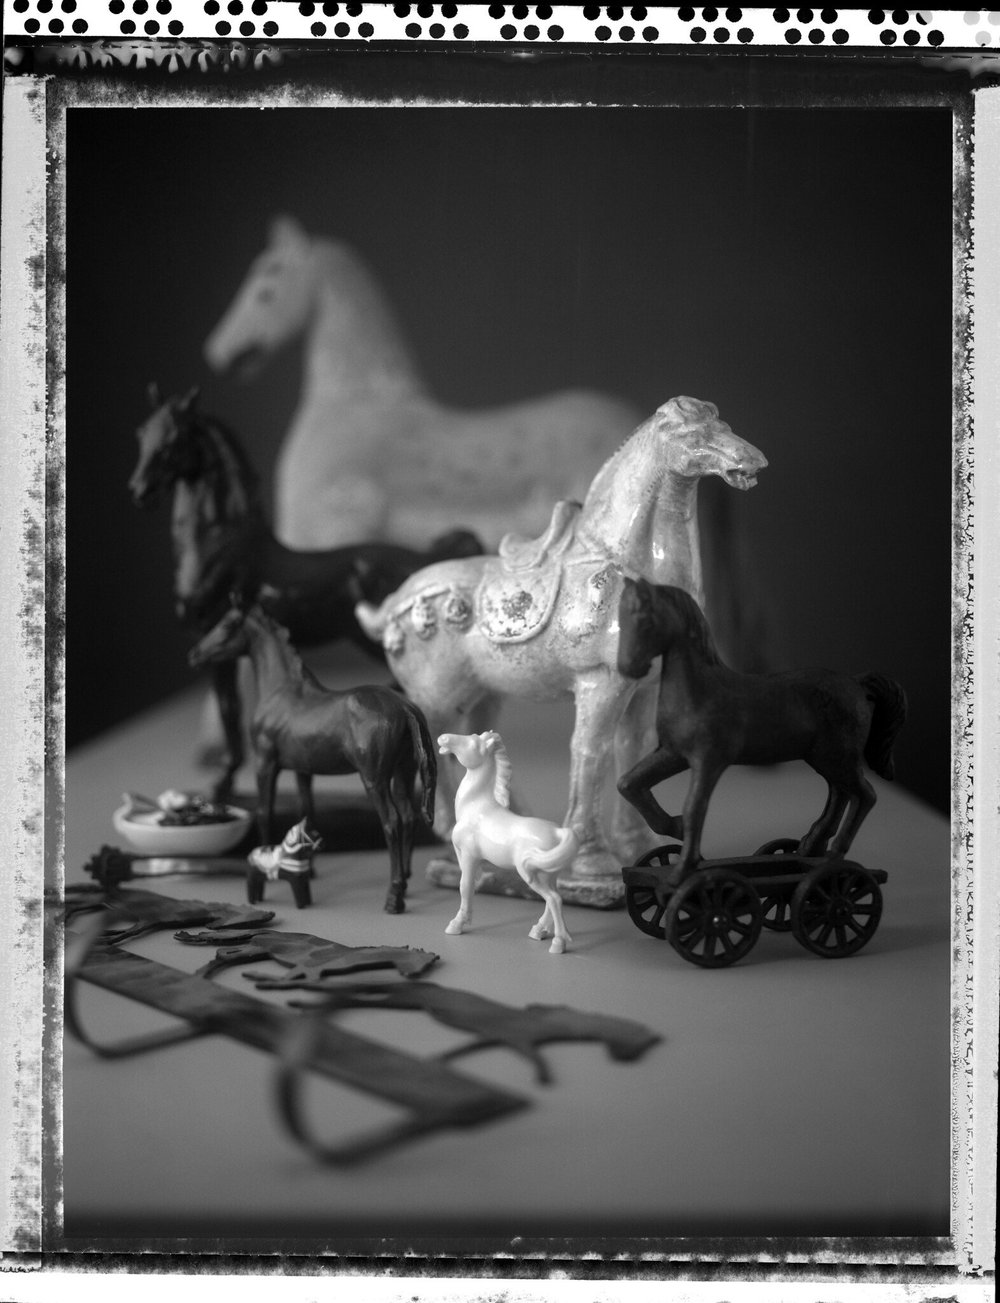 “Horses for Stacey” by Patrick J Clarke